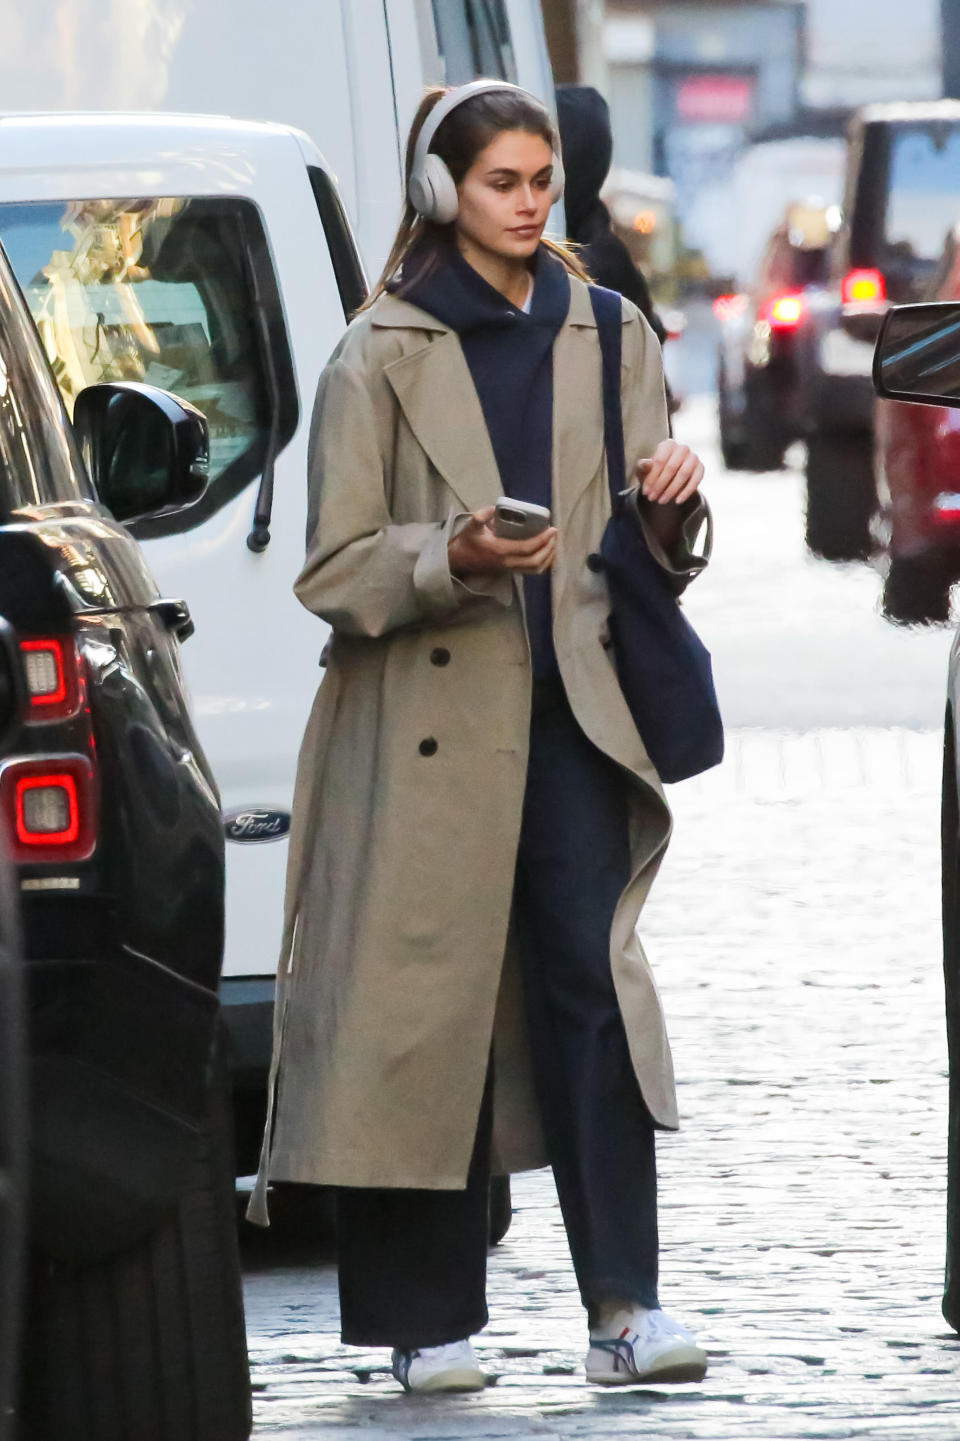 kaia gerber wearing a trench coat and onitsuka sneakers with her AirPods in New York City